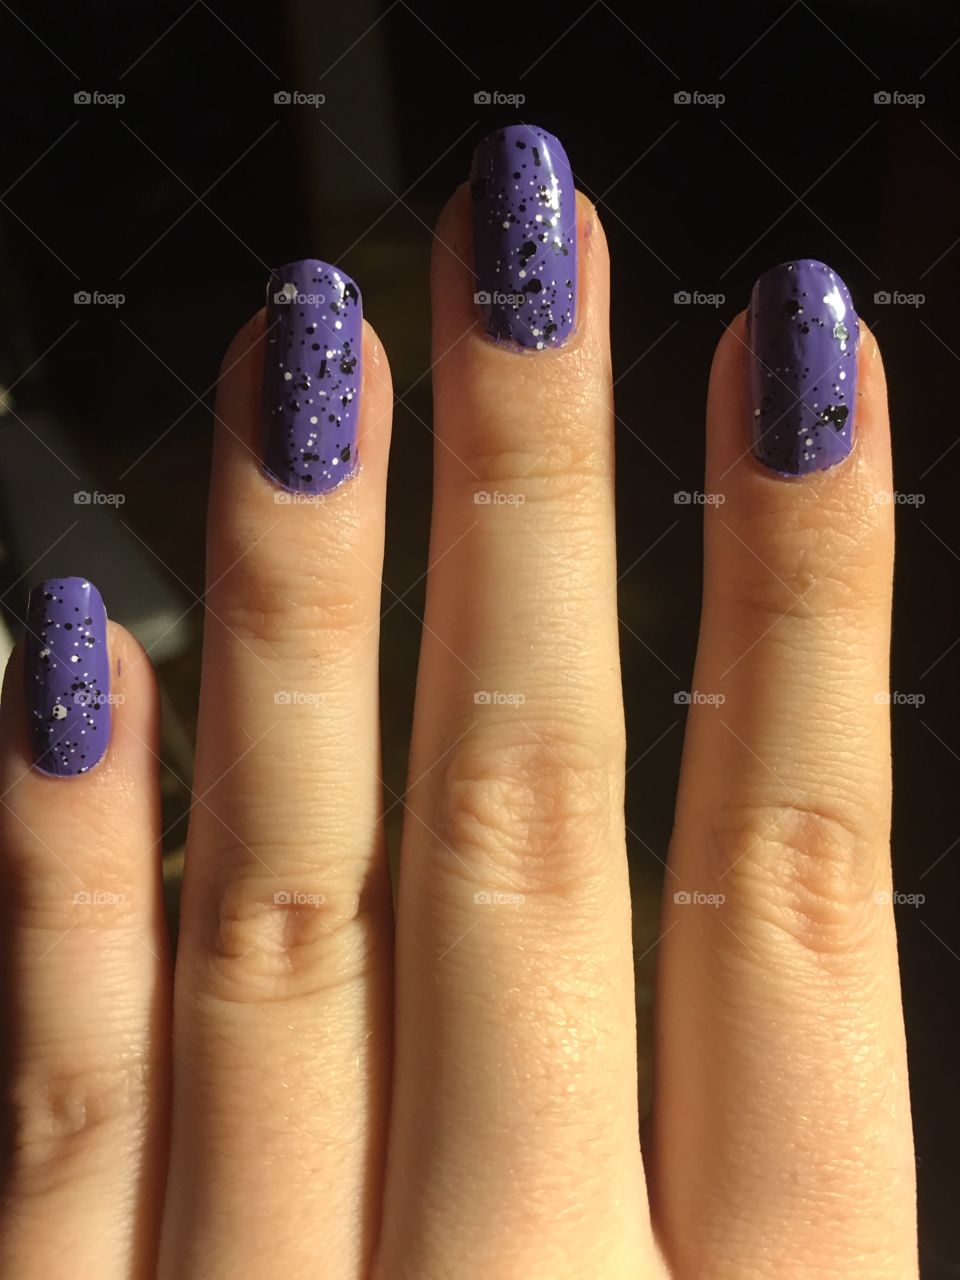 added a black and white speckled top coat to purple nails for something different 